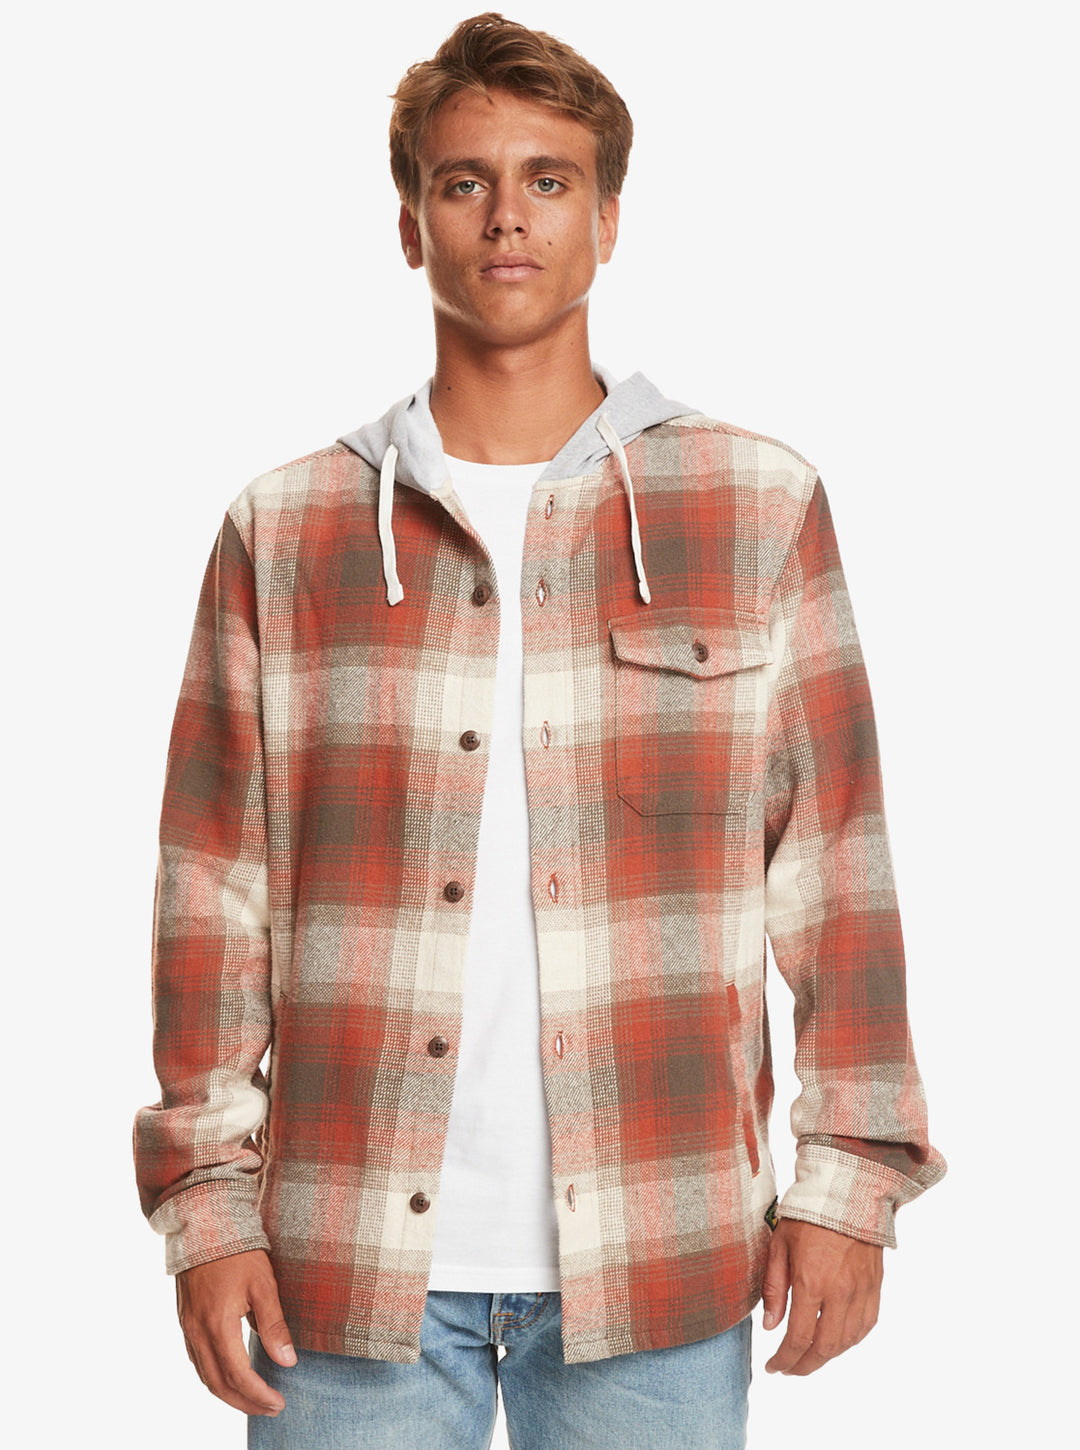 Quiksilver Kinloss Long Sleeve Hooded Shirt - Baked Clay - Sun Diego Boardshop